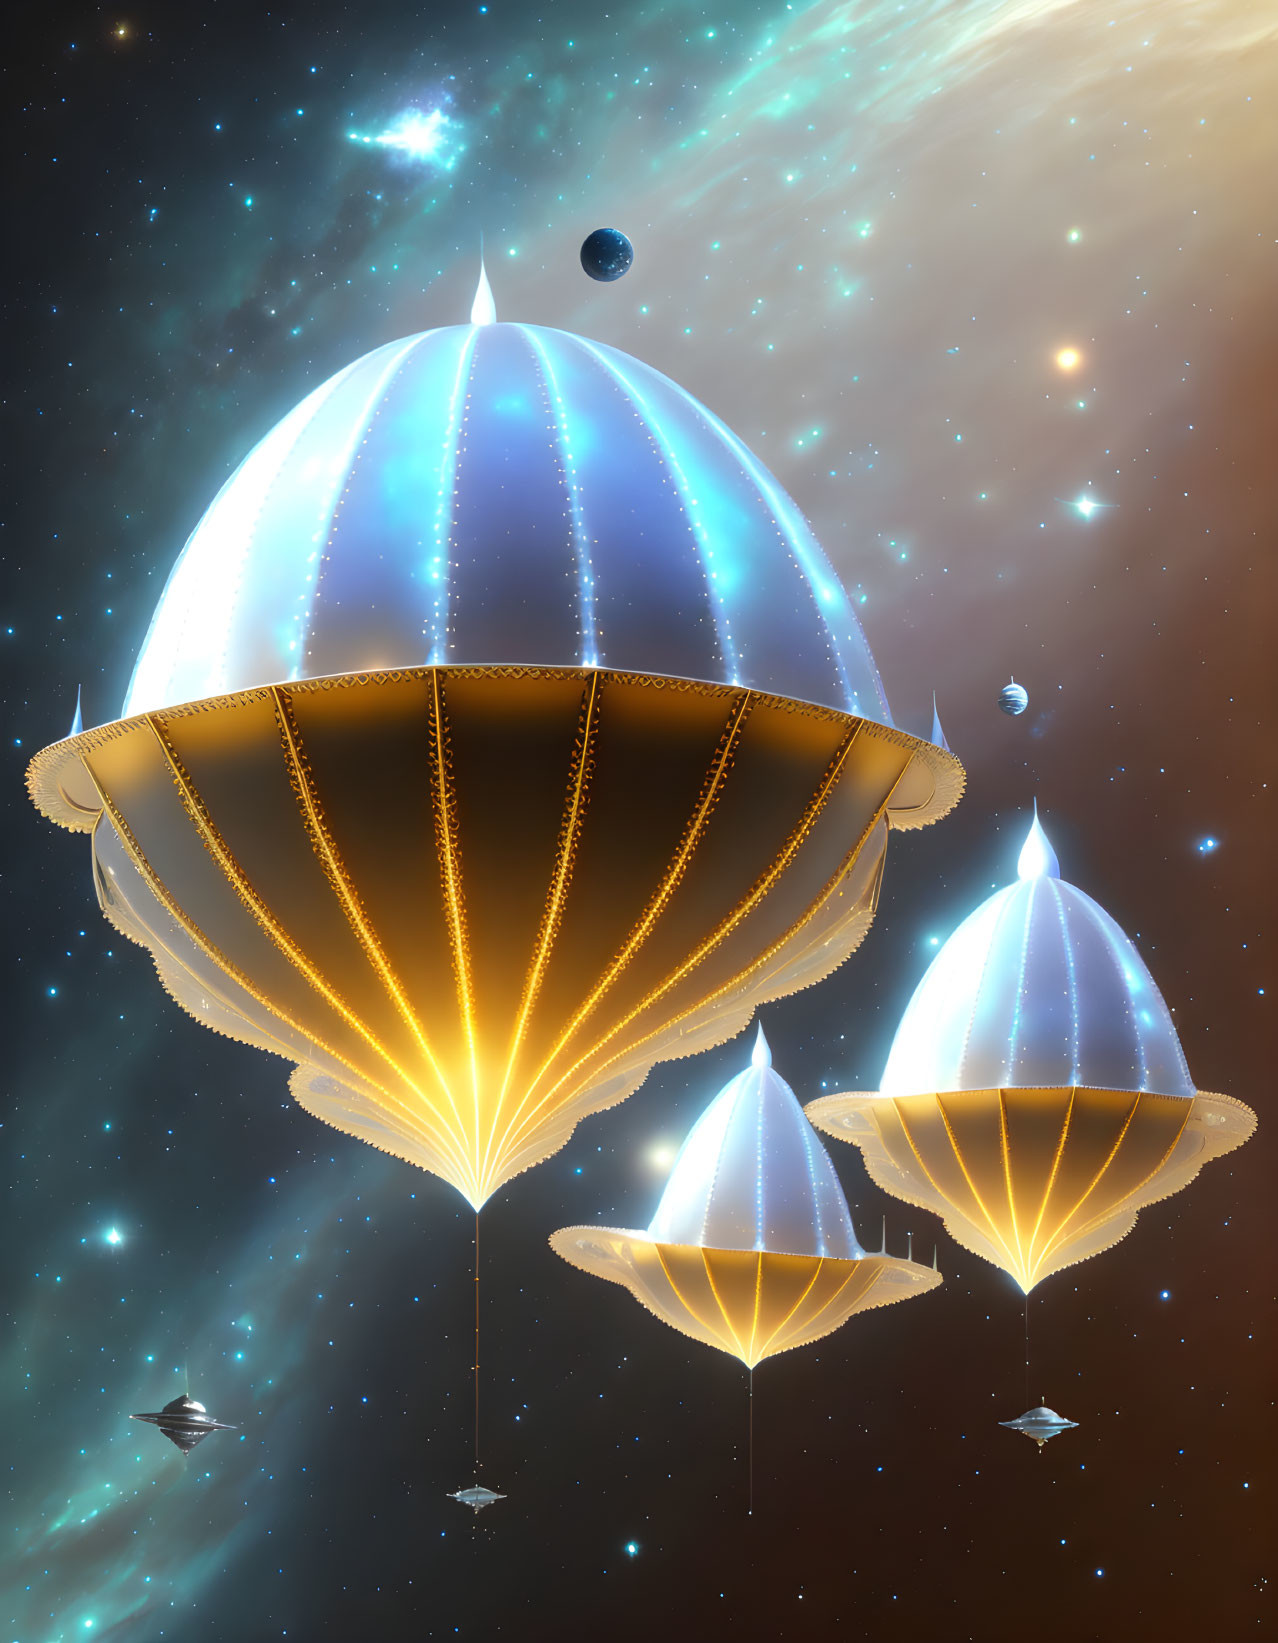 Futuristic jellyfish-like airships in starry space